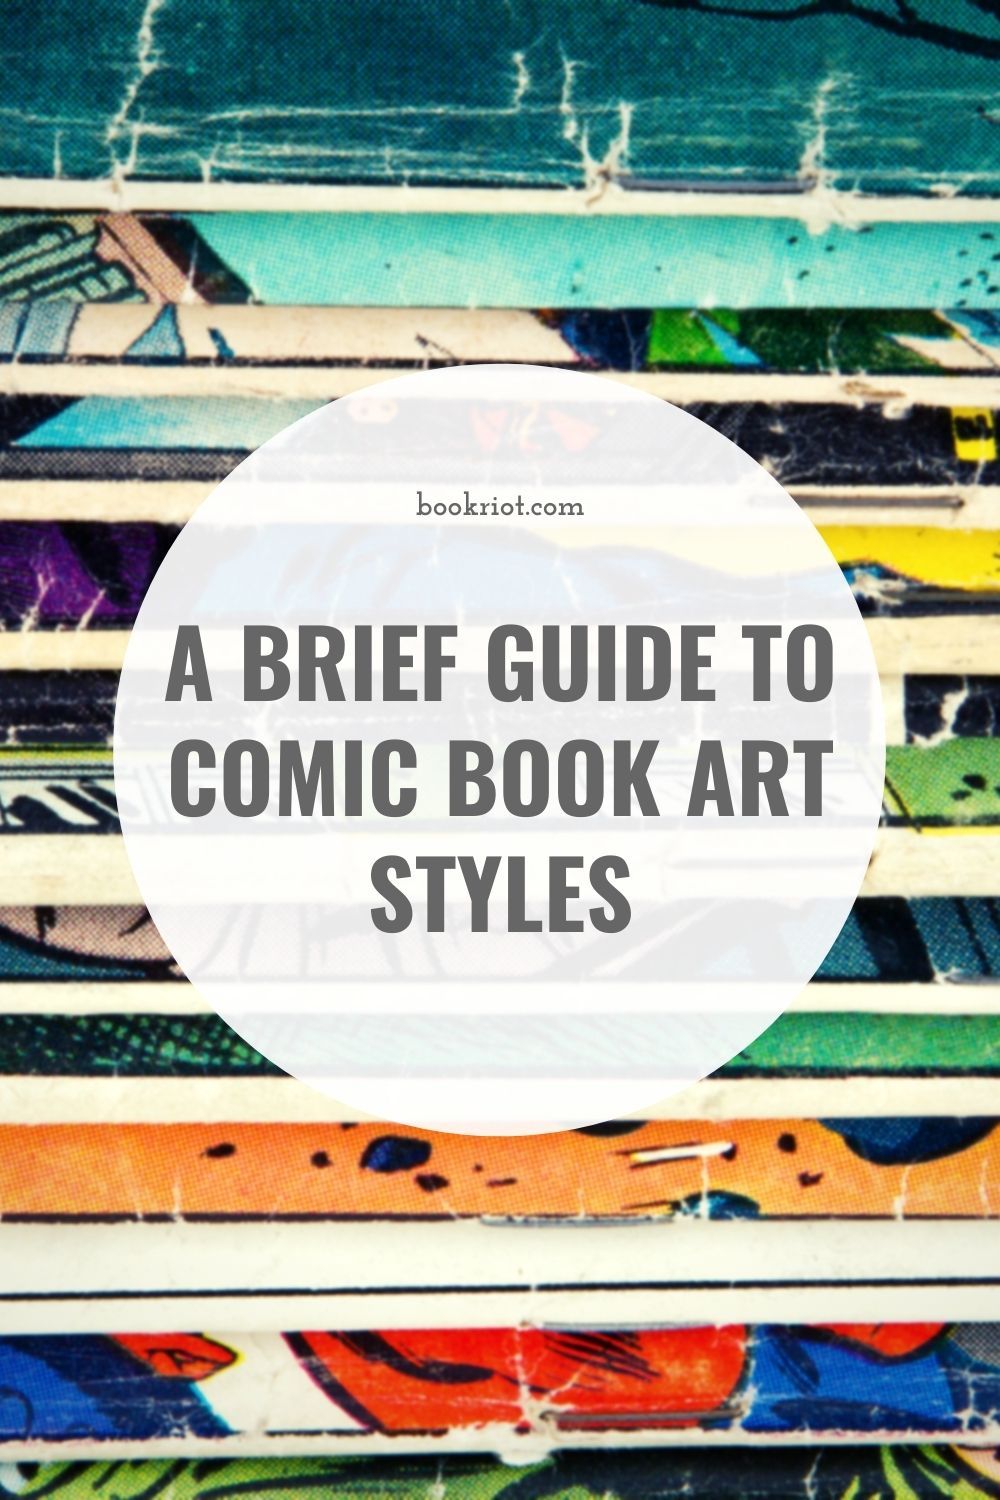 A Brief Guide to Comic Book Art Styles | Book Riot